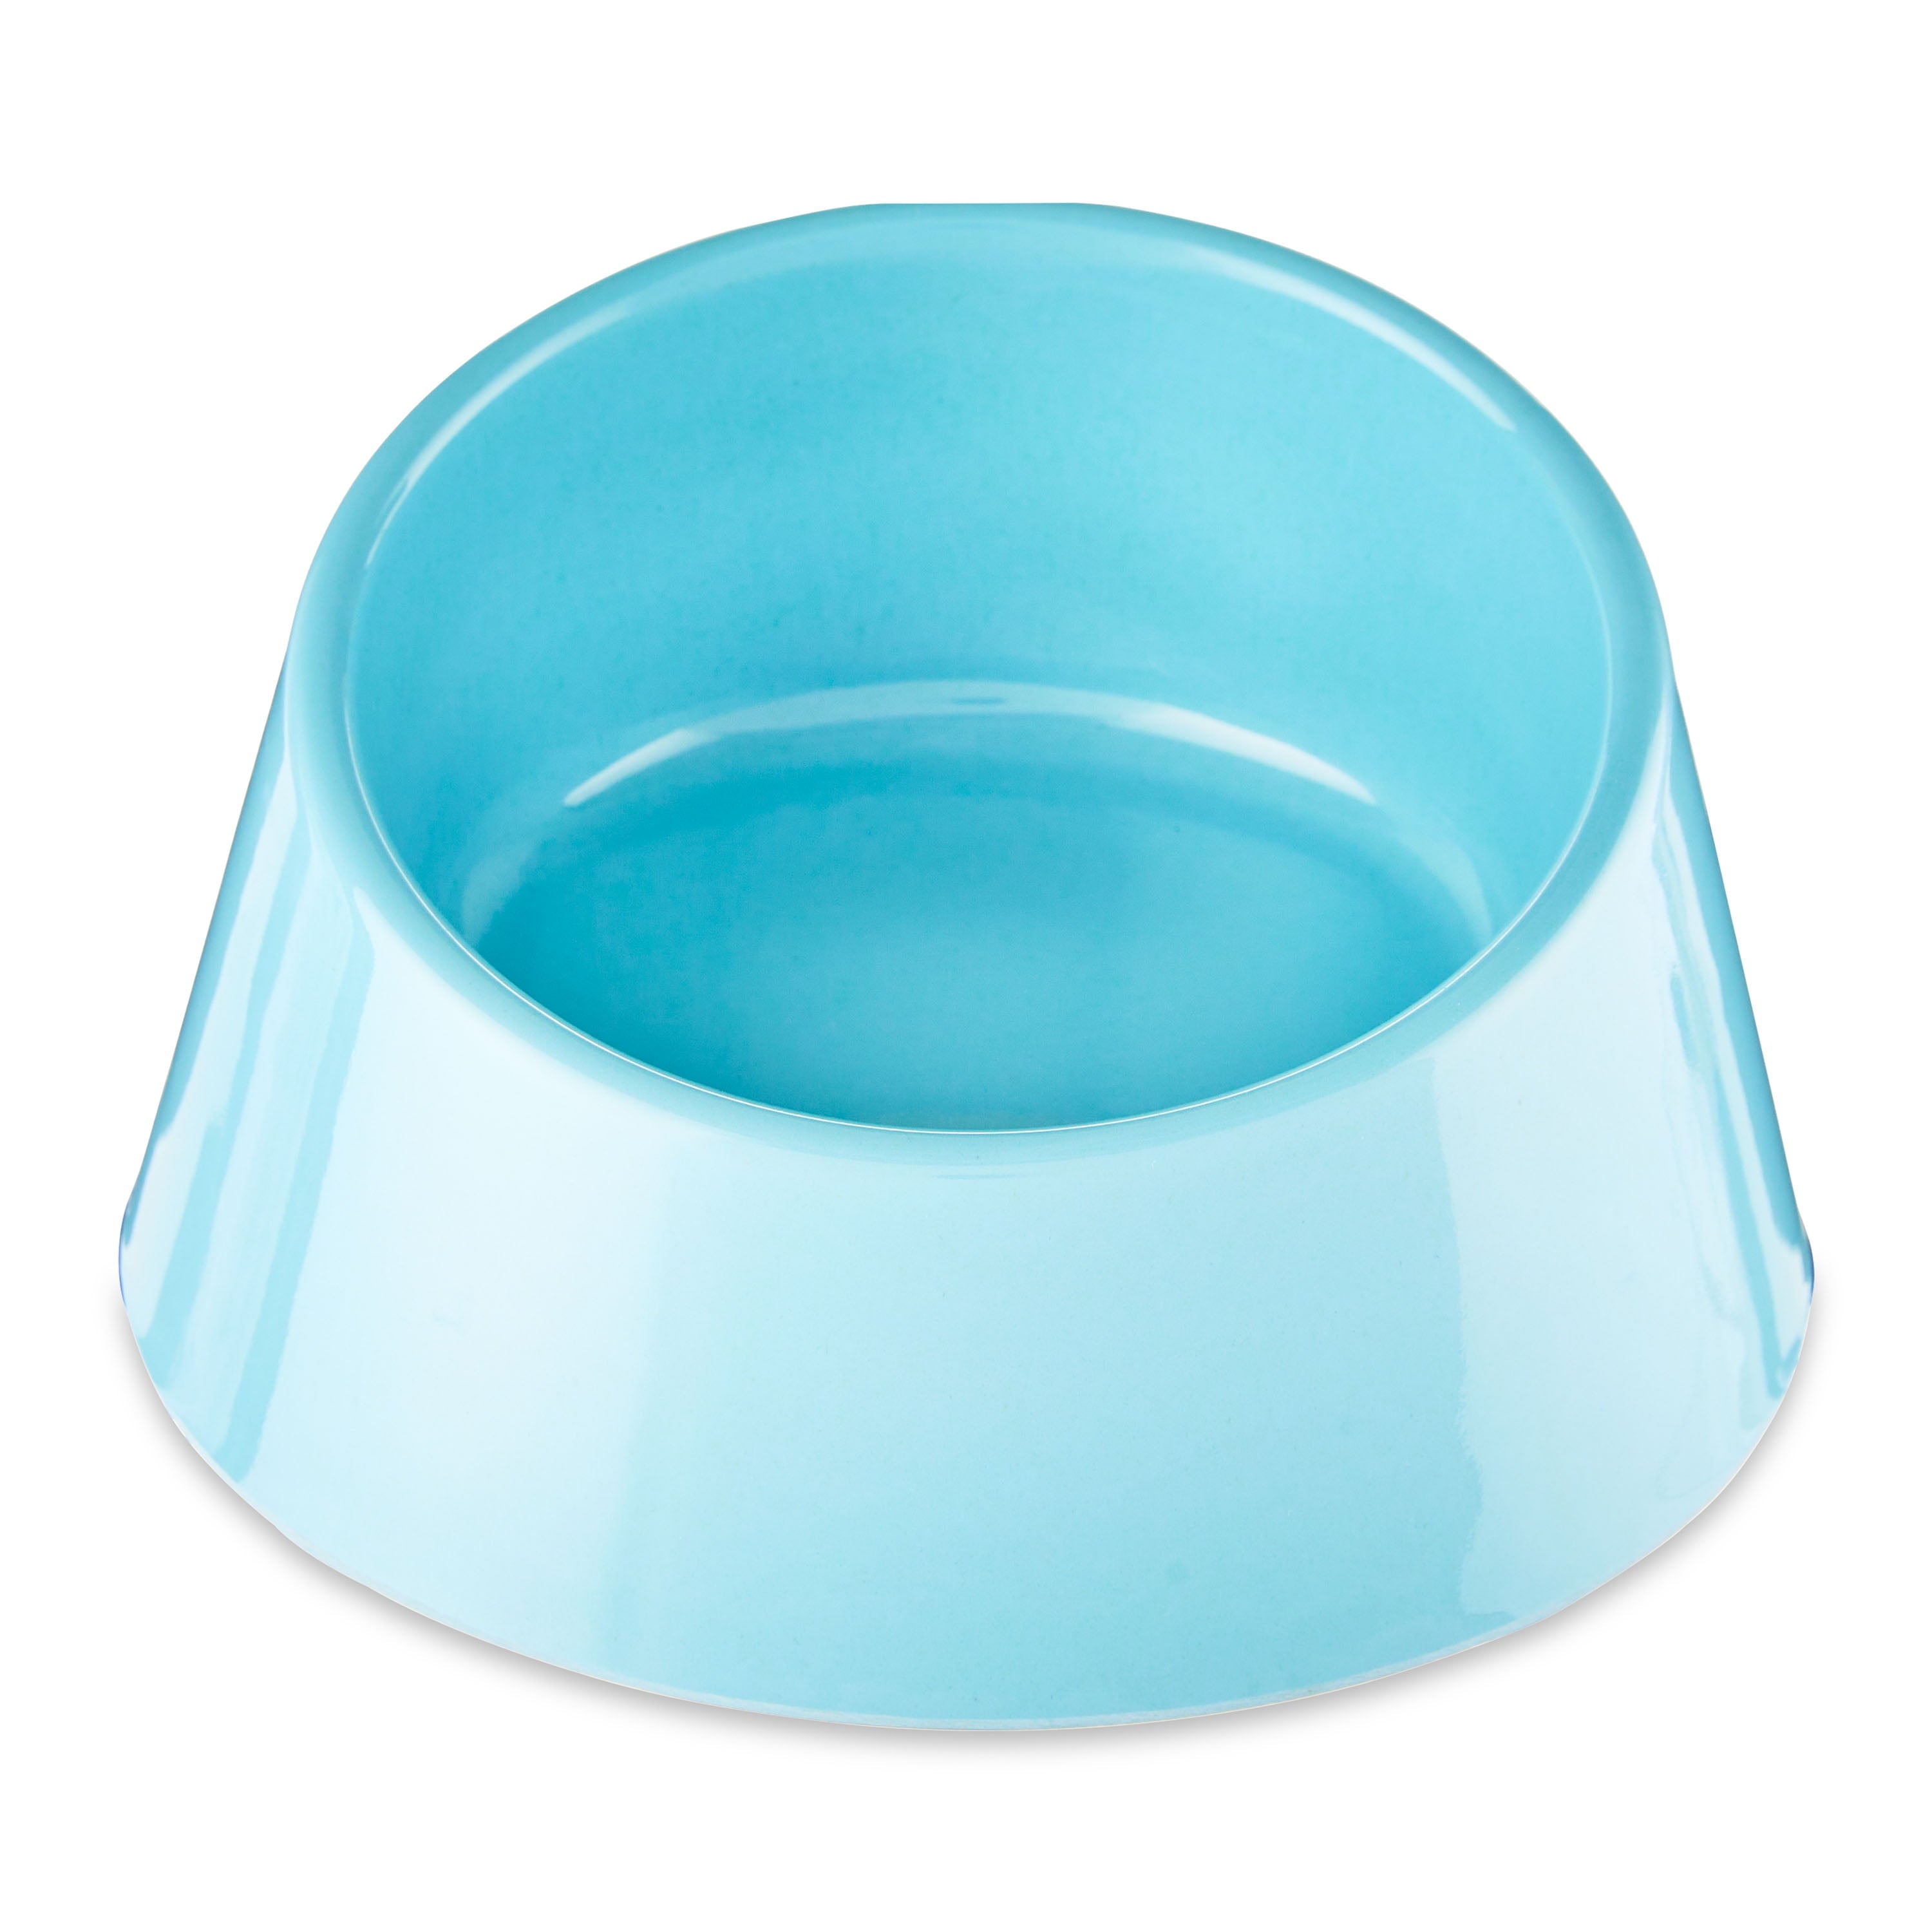 Wholesale prices with free shipping all over United States Vibrant Life Raised High Back Pet Bowl, Teal, Small, 8 oz - Steven Deals